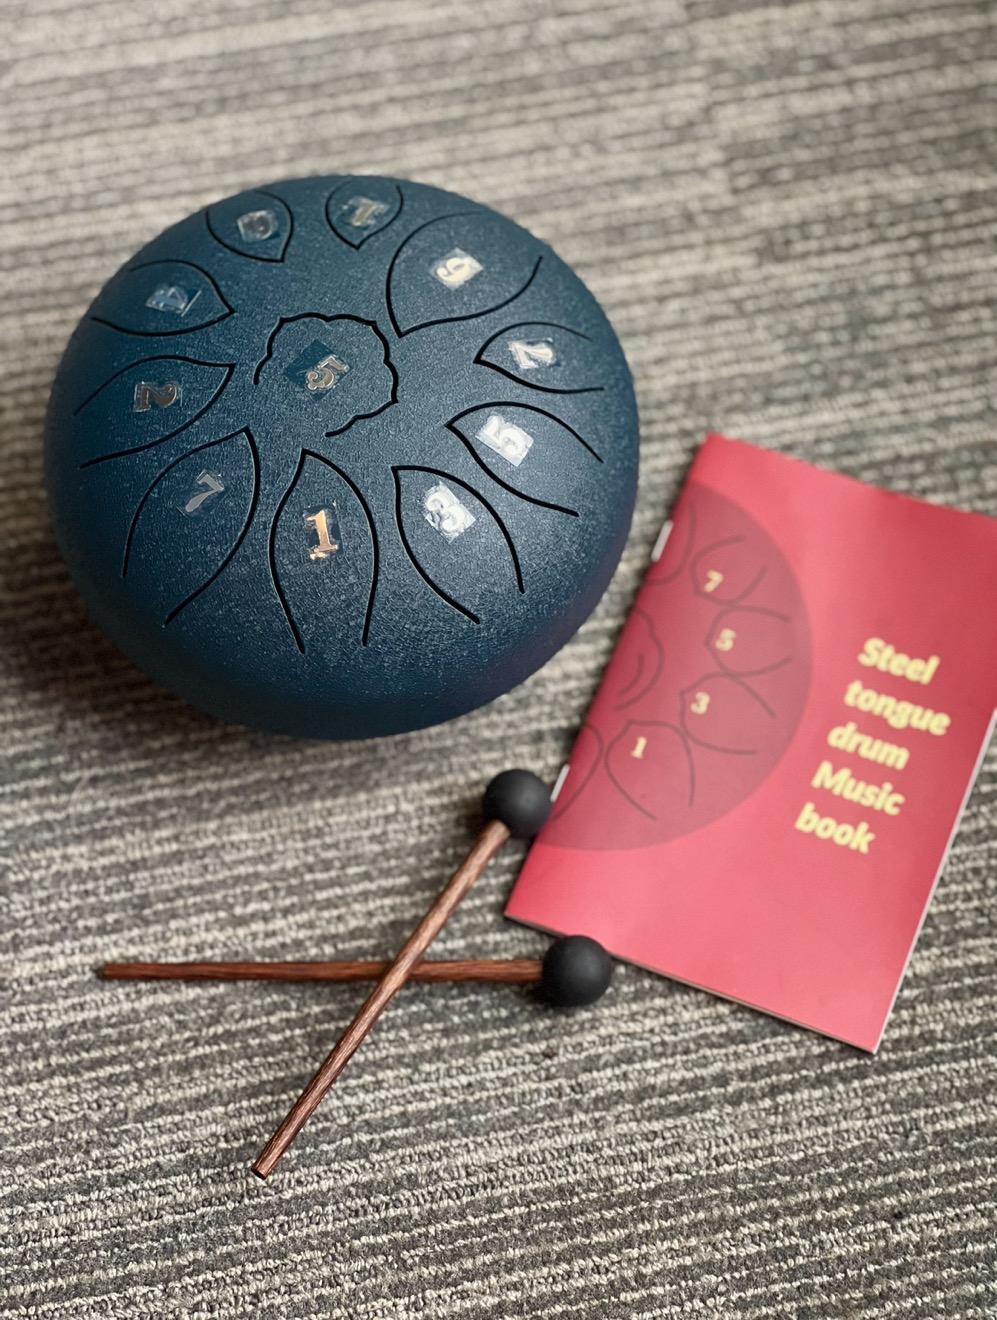 Blue drum labeled with numbers 1-6, two wooden drum mallets with a black rubber top and a maroon steel tongue drum music book.